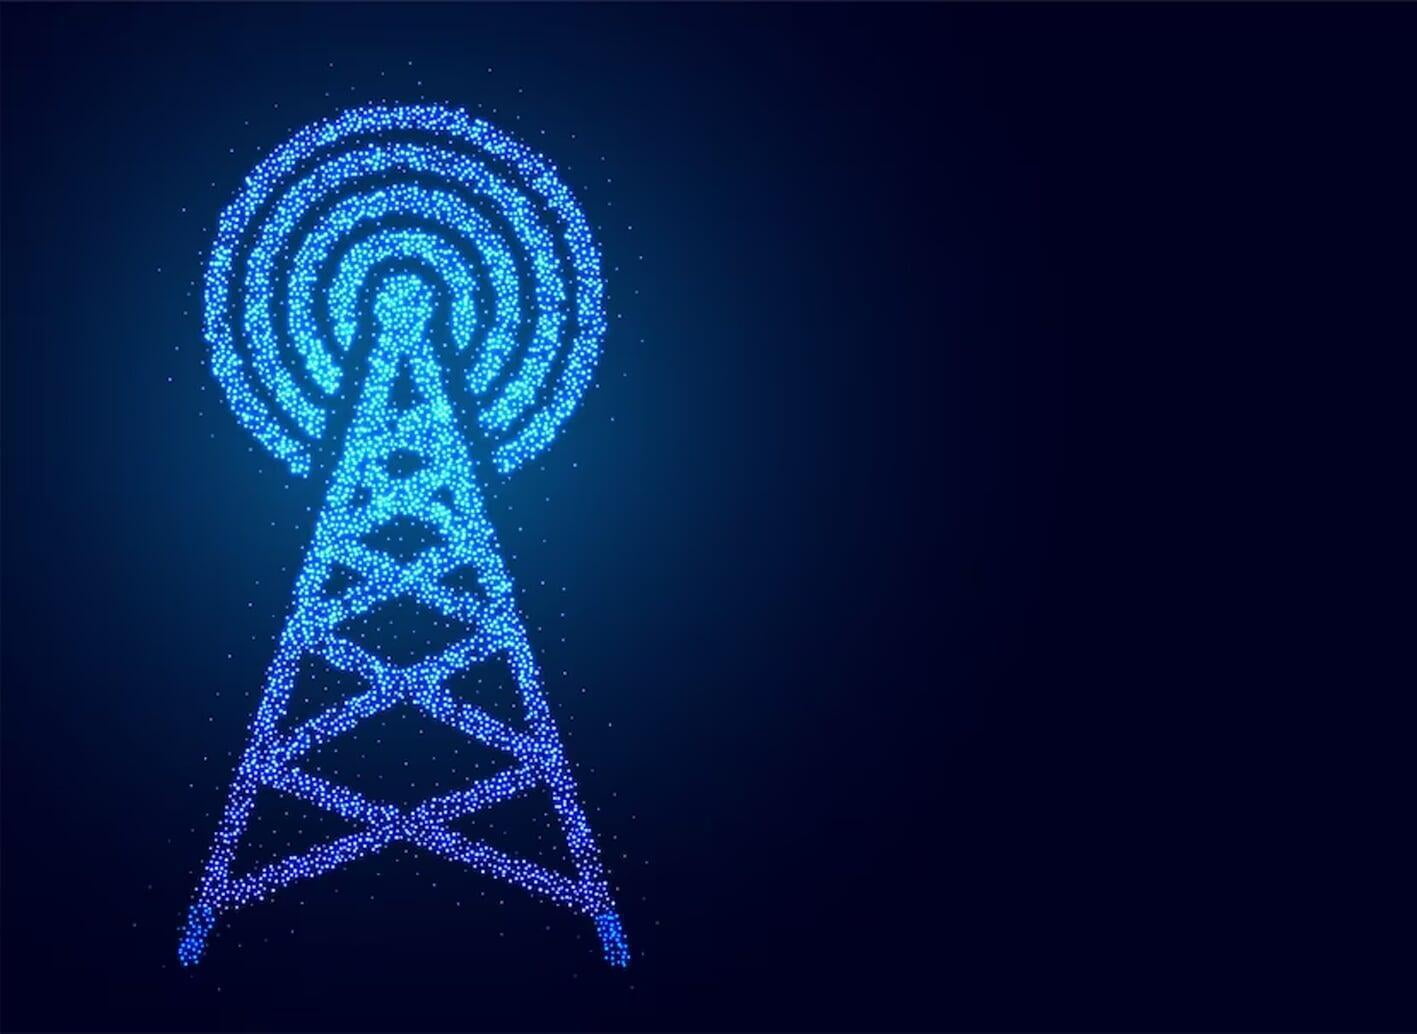 Image of a radio tower